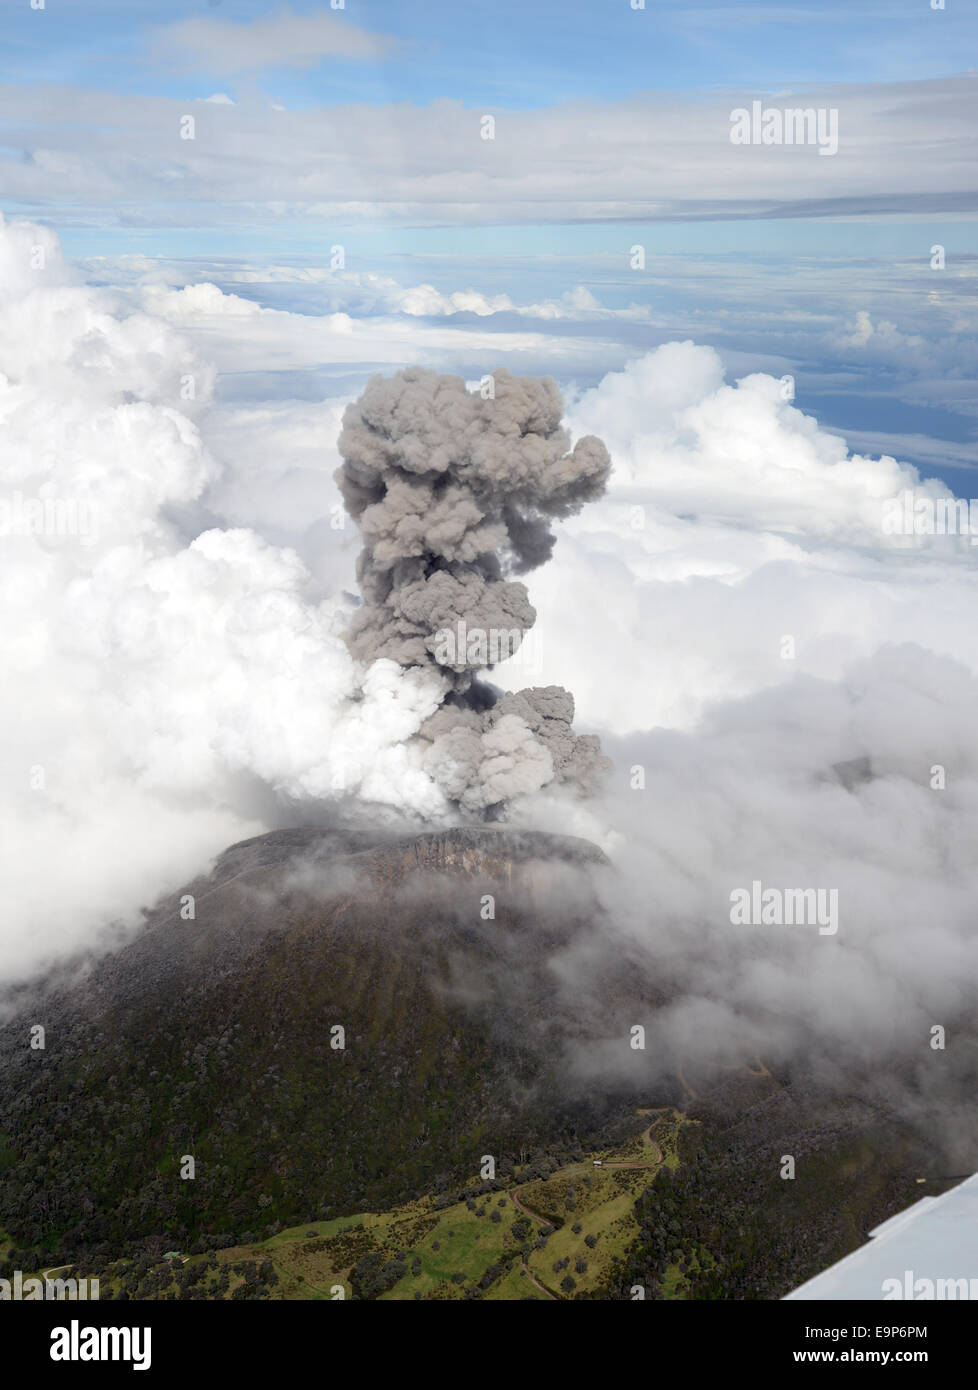 (141031) -- SANTA CRUZ DE TURRIALBA, Oct. 31, 2014 (Xinhua) -- Image provided by the Seismological National Network of members of the Volcanological and Seismological Observatory of Costa Rica (OVSICORI, for its acronym in Spanish), of smoke columns rising from the Turrialba Volcano after an eruption, near Santa Cruz de Turrialba, 65km northeast of San Jose, capital of Costa Rica, on Oct. 30, 2014. The Turrialba Volcano presented an eruption of ashes and stones on Thursday, provoking the evacuation of residents living in the surrounding area, according to the local press. (Xinhua/Volcanologica Stock Photo